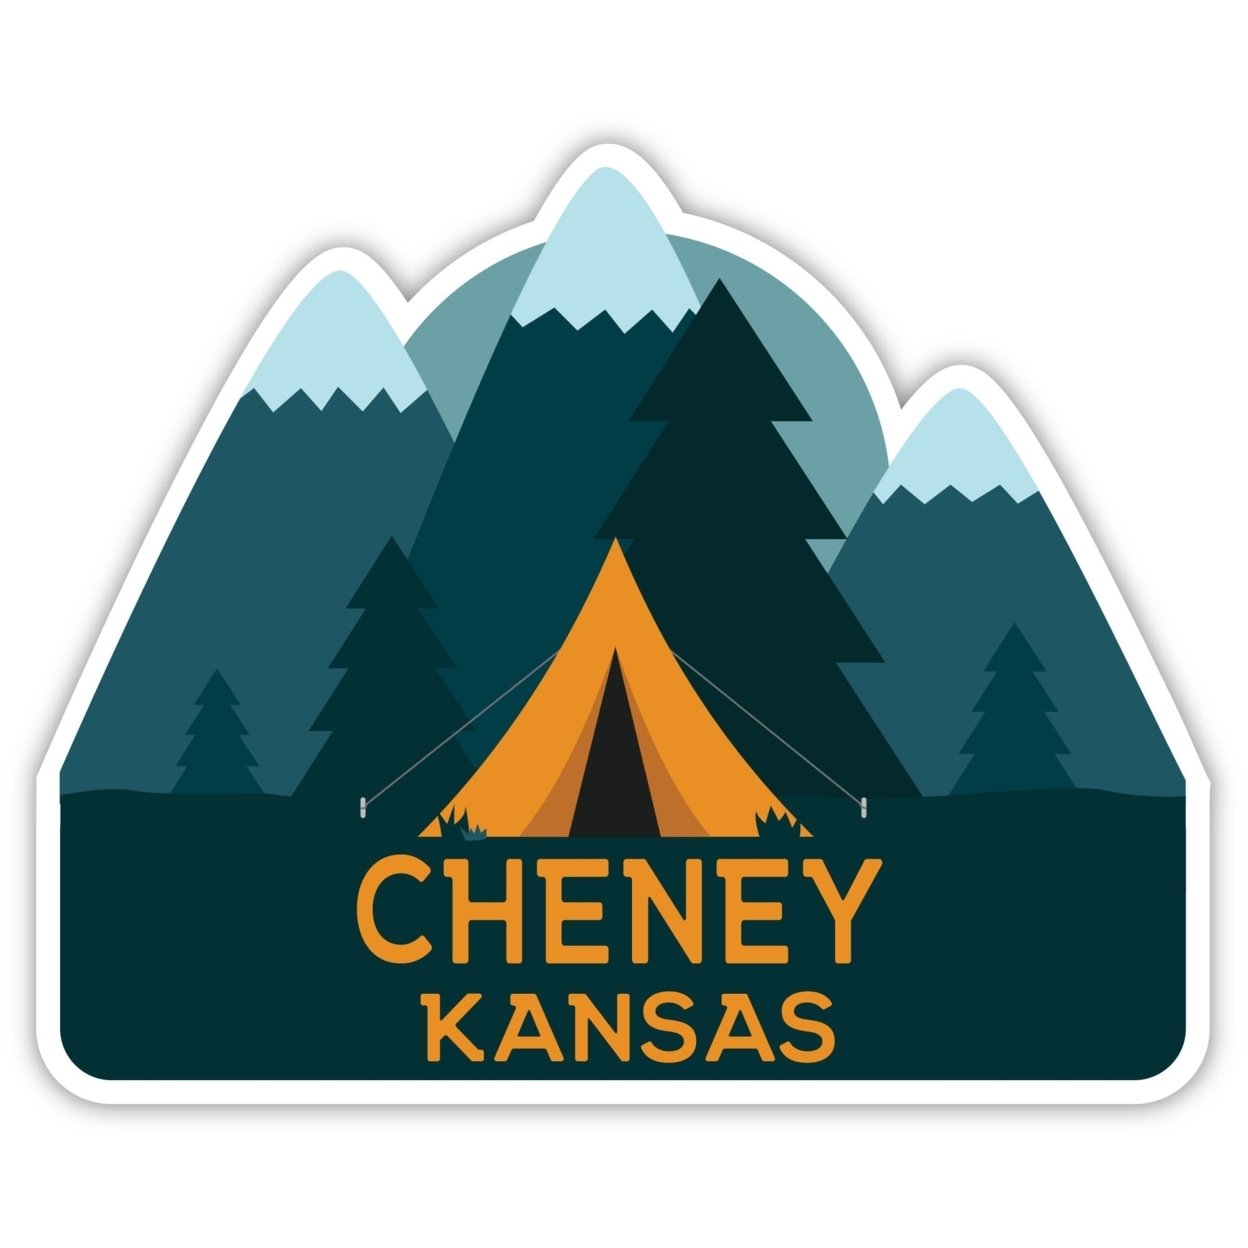 Cheney Kansas Souvenir Decorative Stickers (Choose Theme And Size) - 4-Pack, 2-Inch, Tent